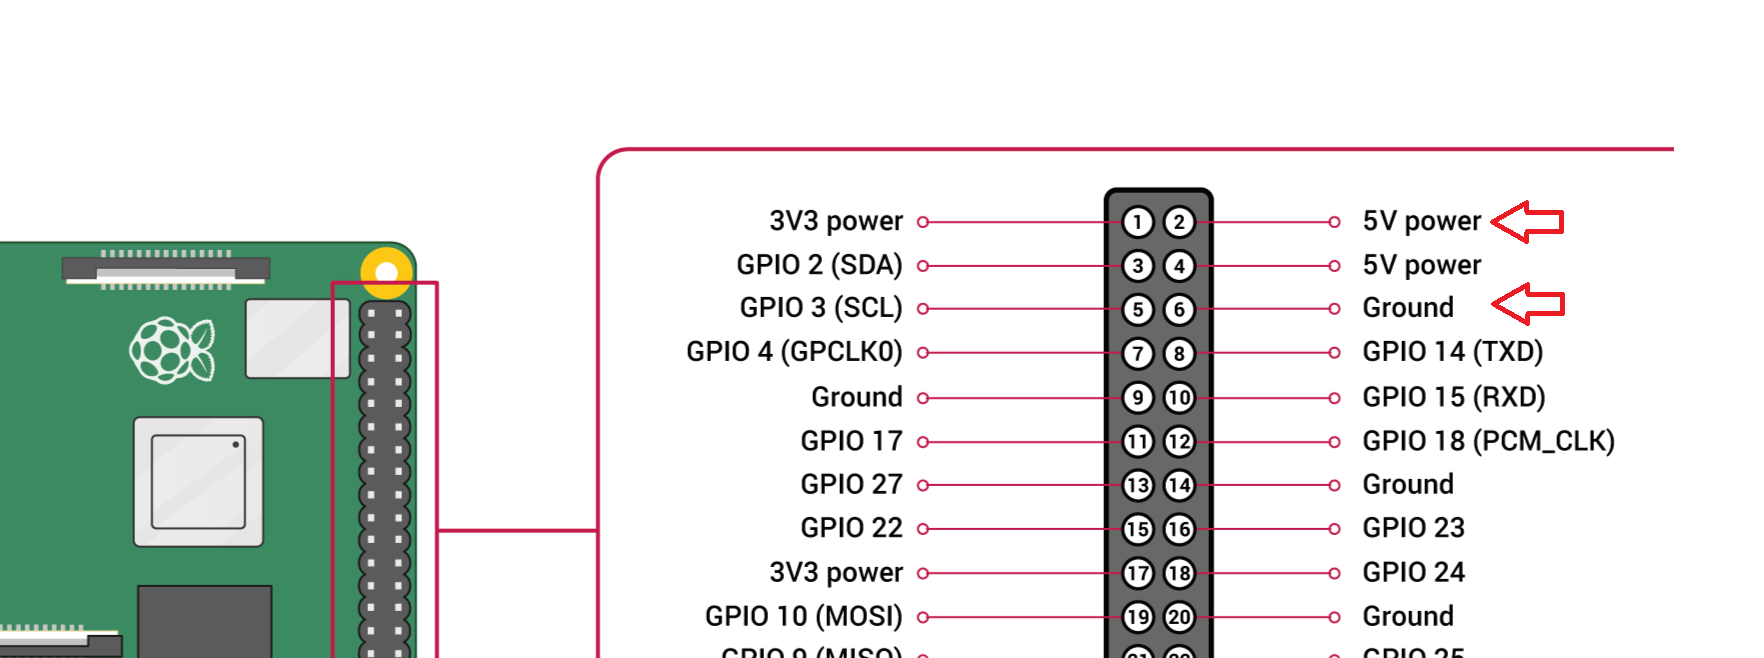 rpi pin header diagram with 5v and ground pins labeled